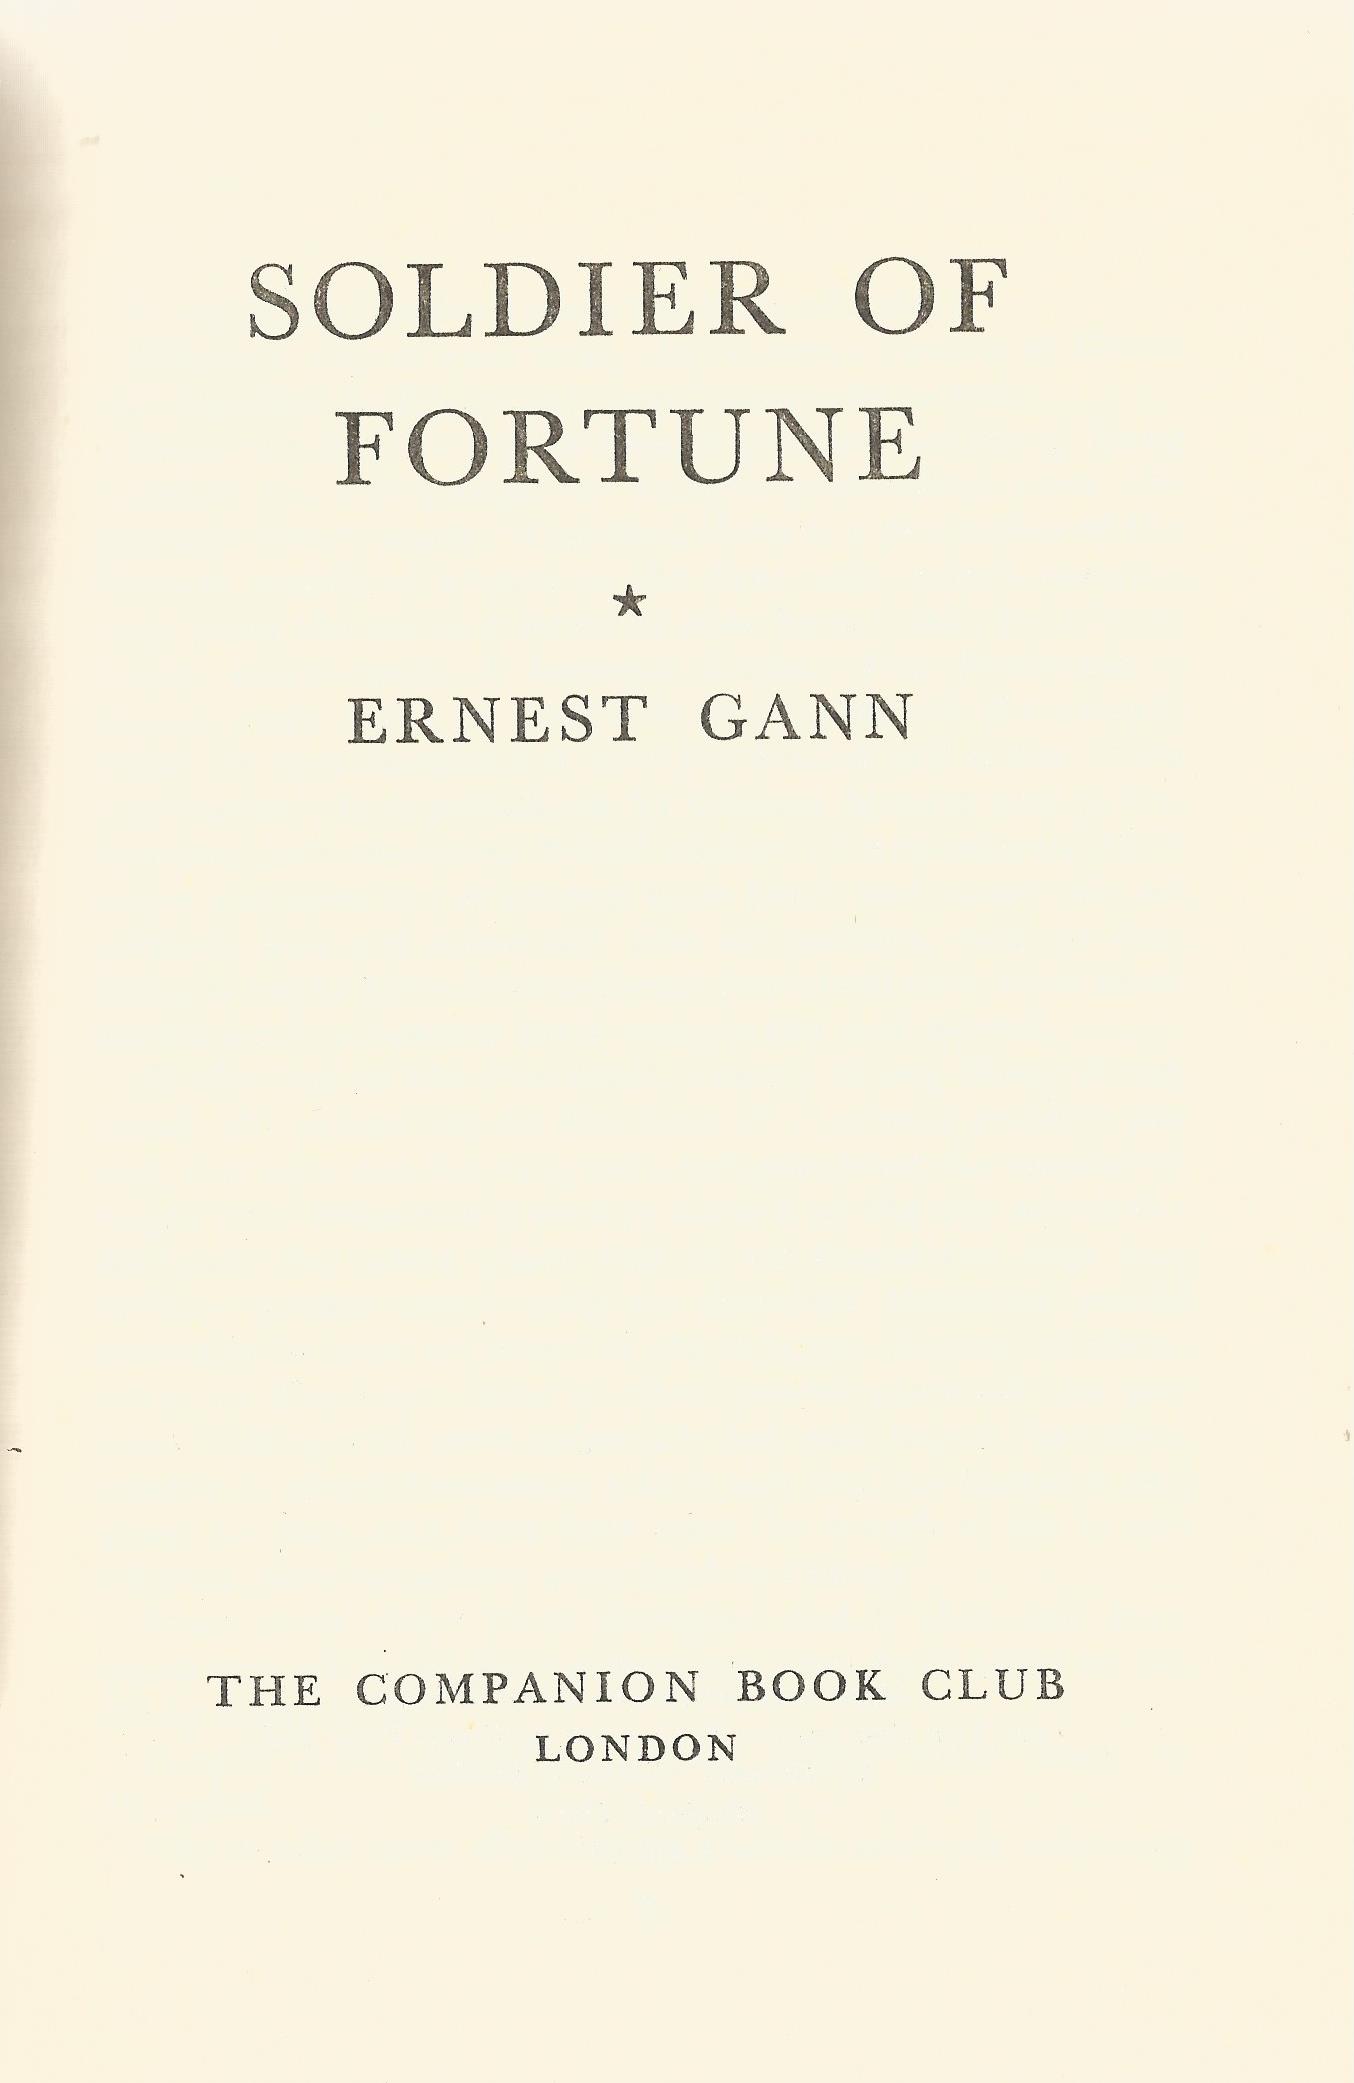 Ernest Gann hardback book Soldier of Fortune 1956 published by The Companion Book Club (Odhams Press - Image 2 of 2